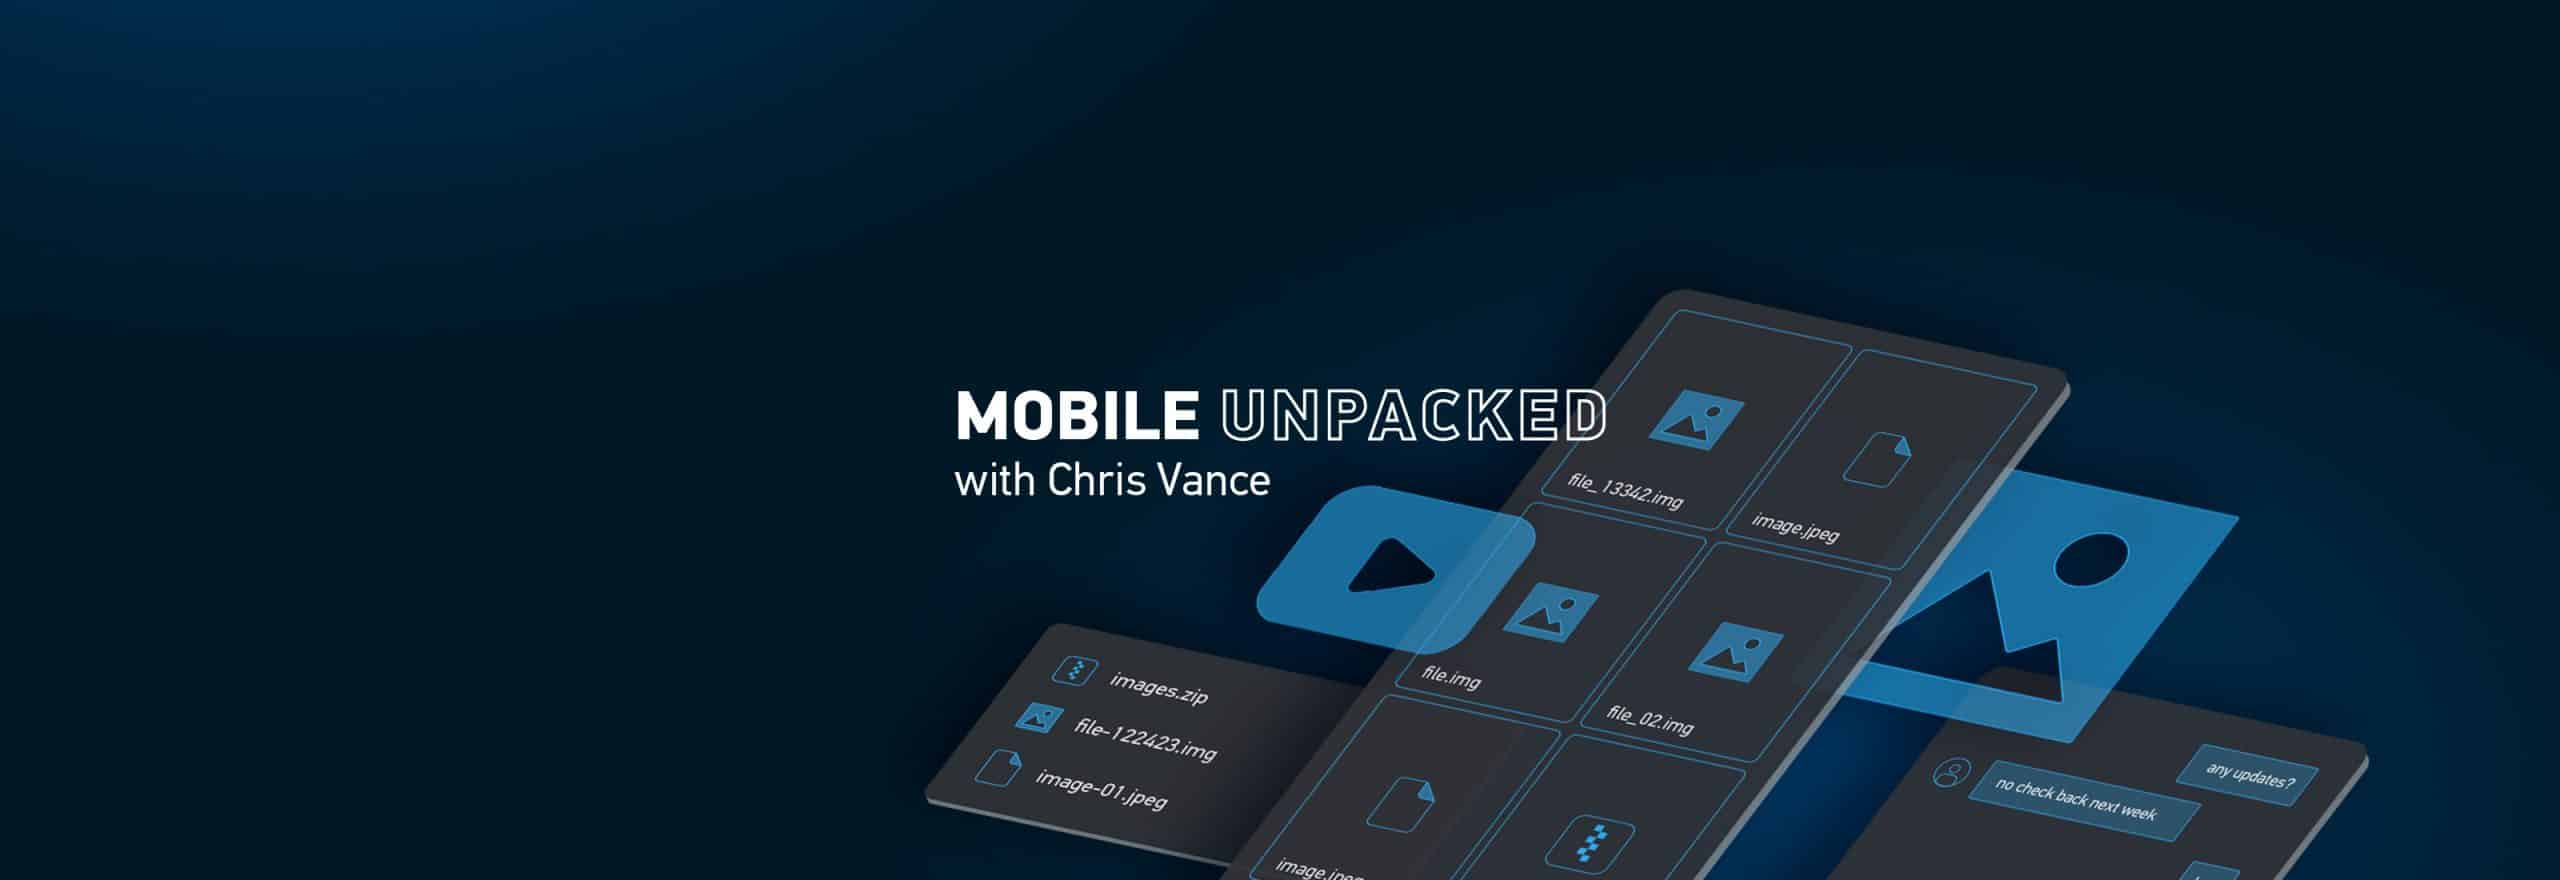 Mobile Unpacked With Chris Vance